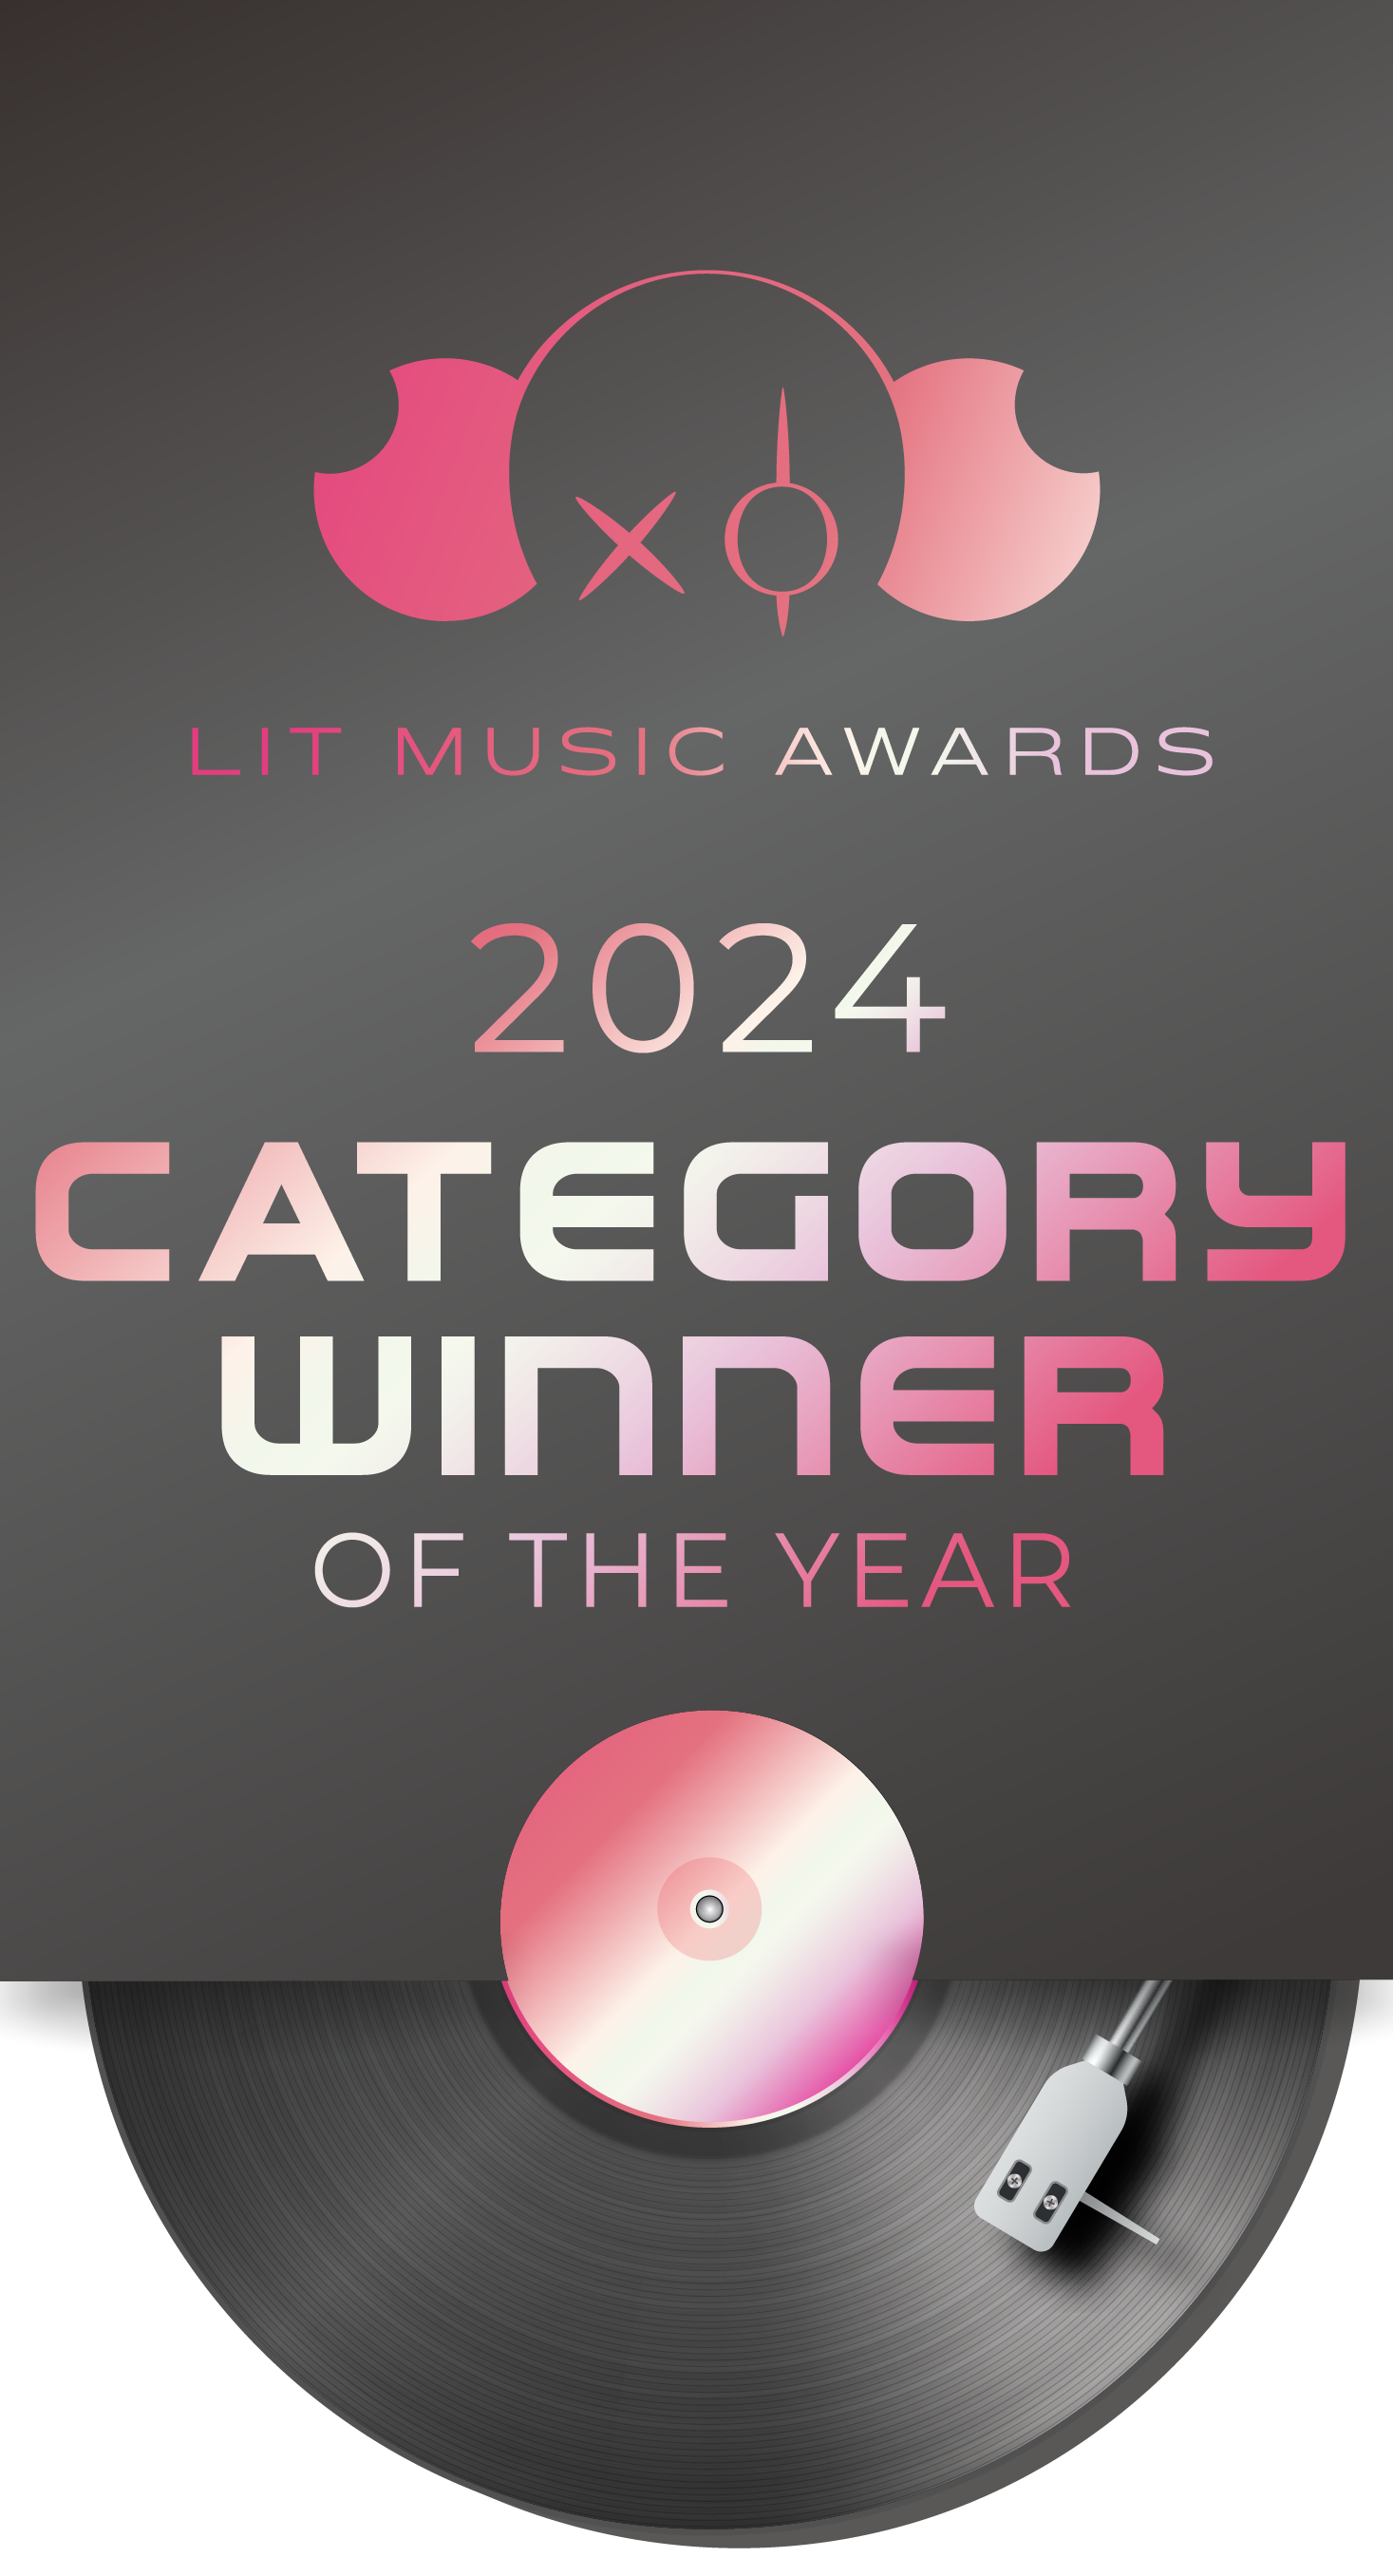 LIT Music Awards  - Category Winner of the Year